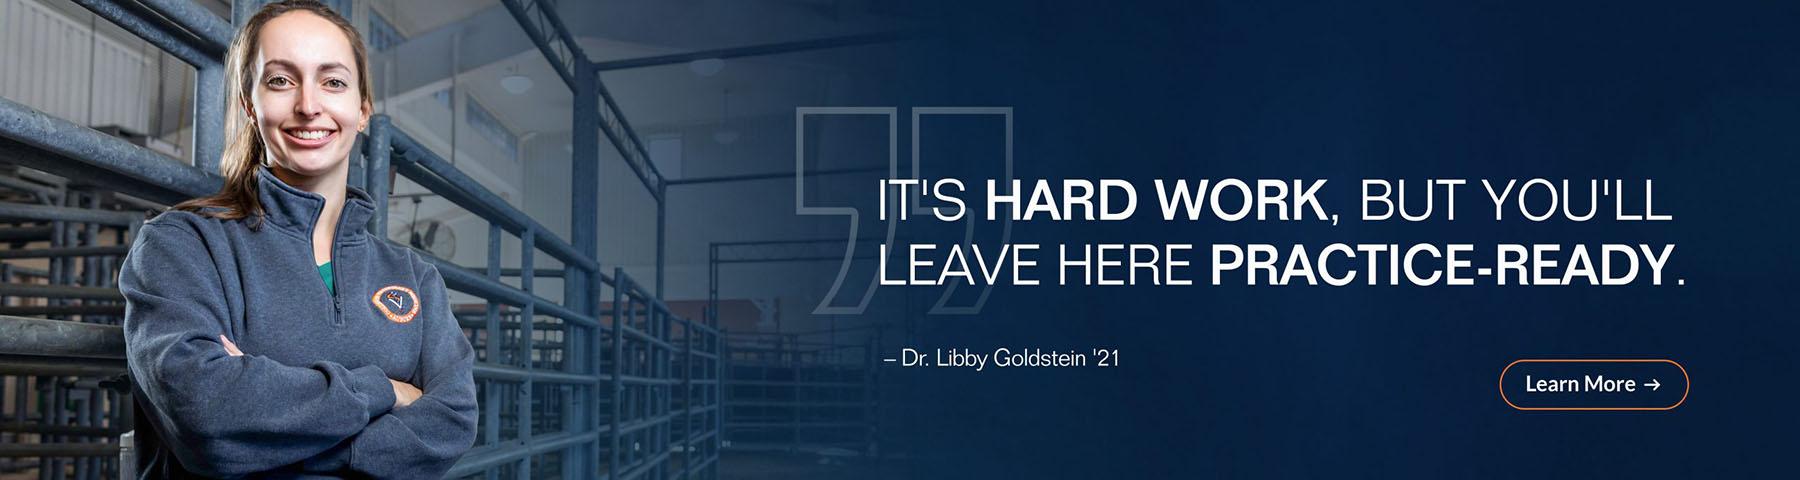 It's hard work but you'll leave here practice ready. Libby Goldstein